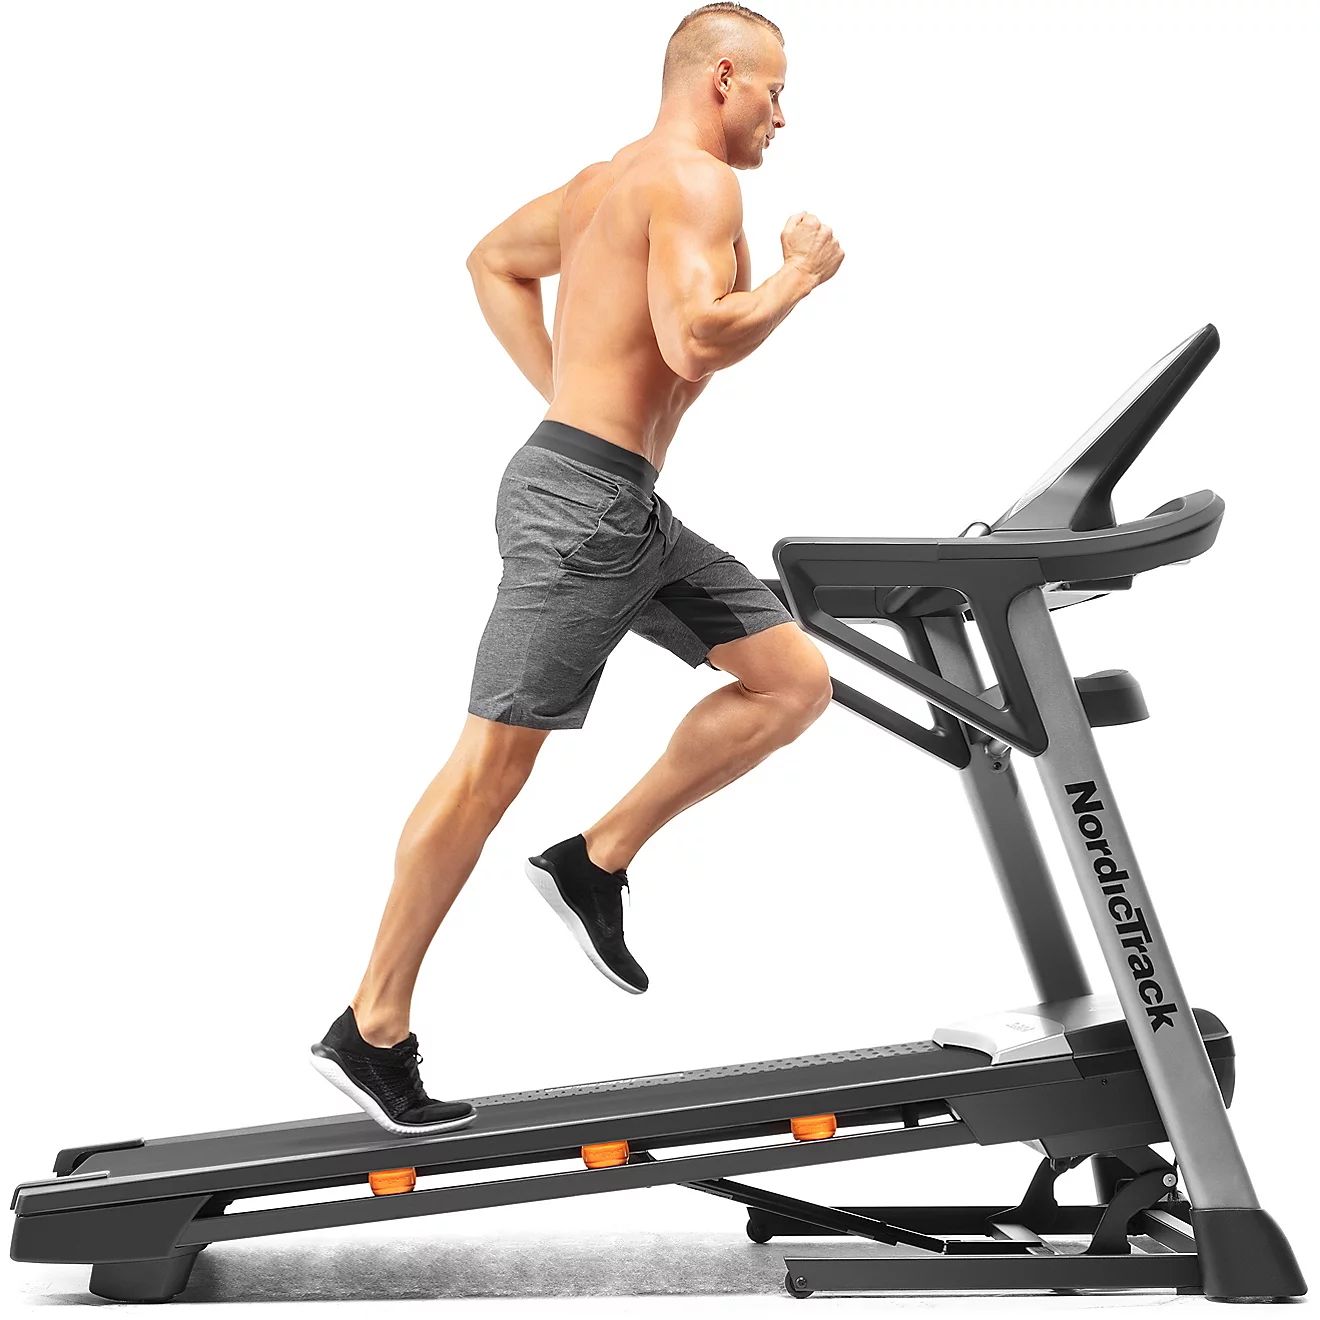 NordicTrack T 7.5 Series Treadmill | Academy | Academy Sports + Outdoors